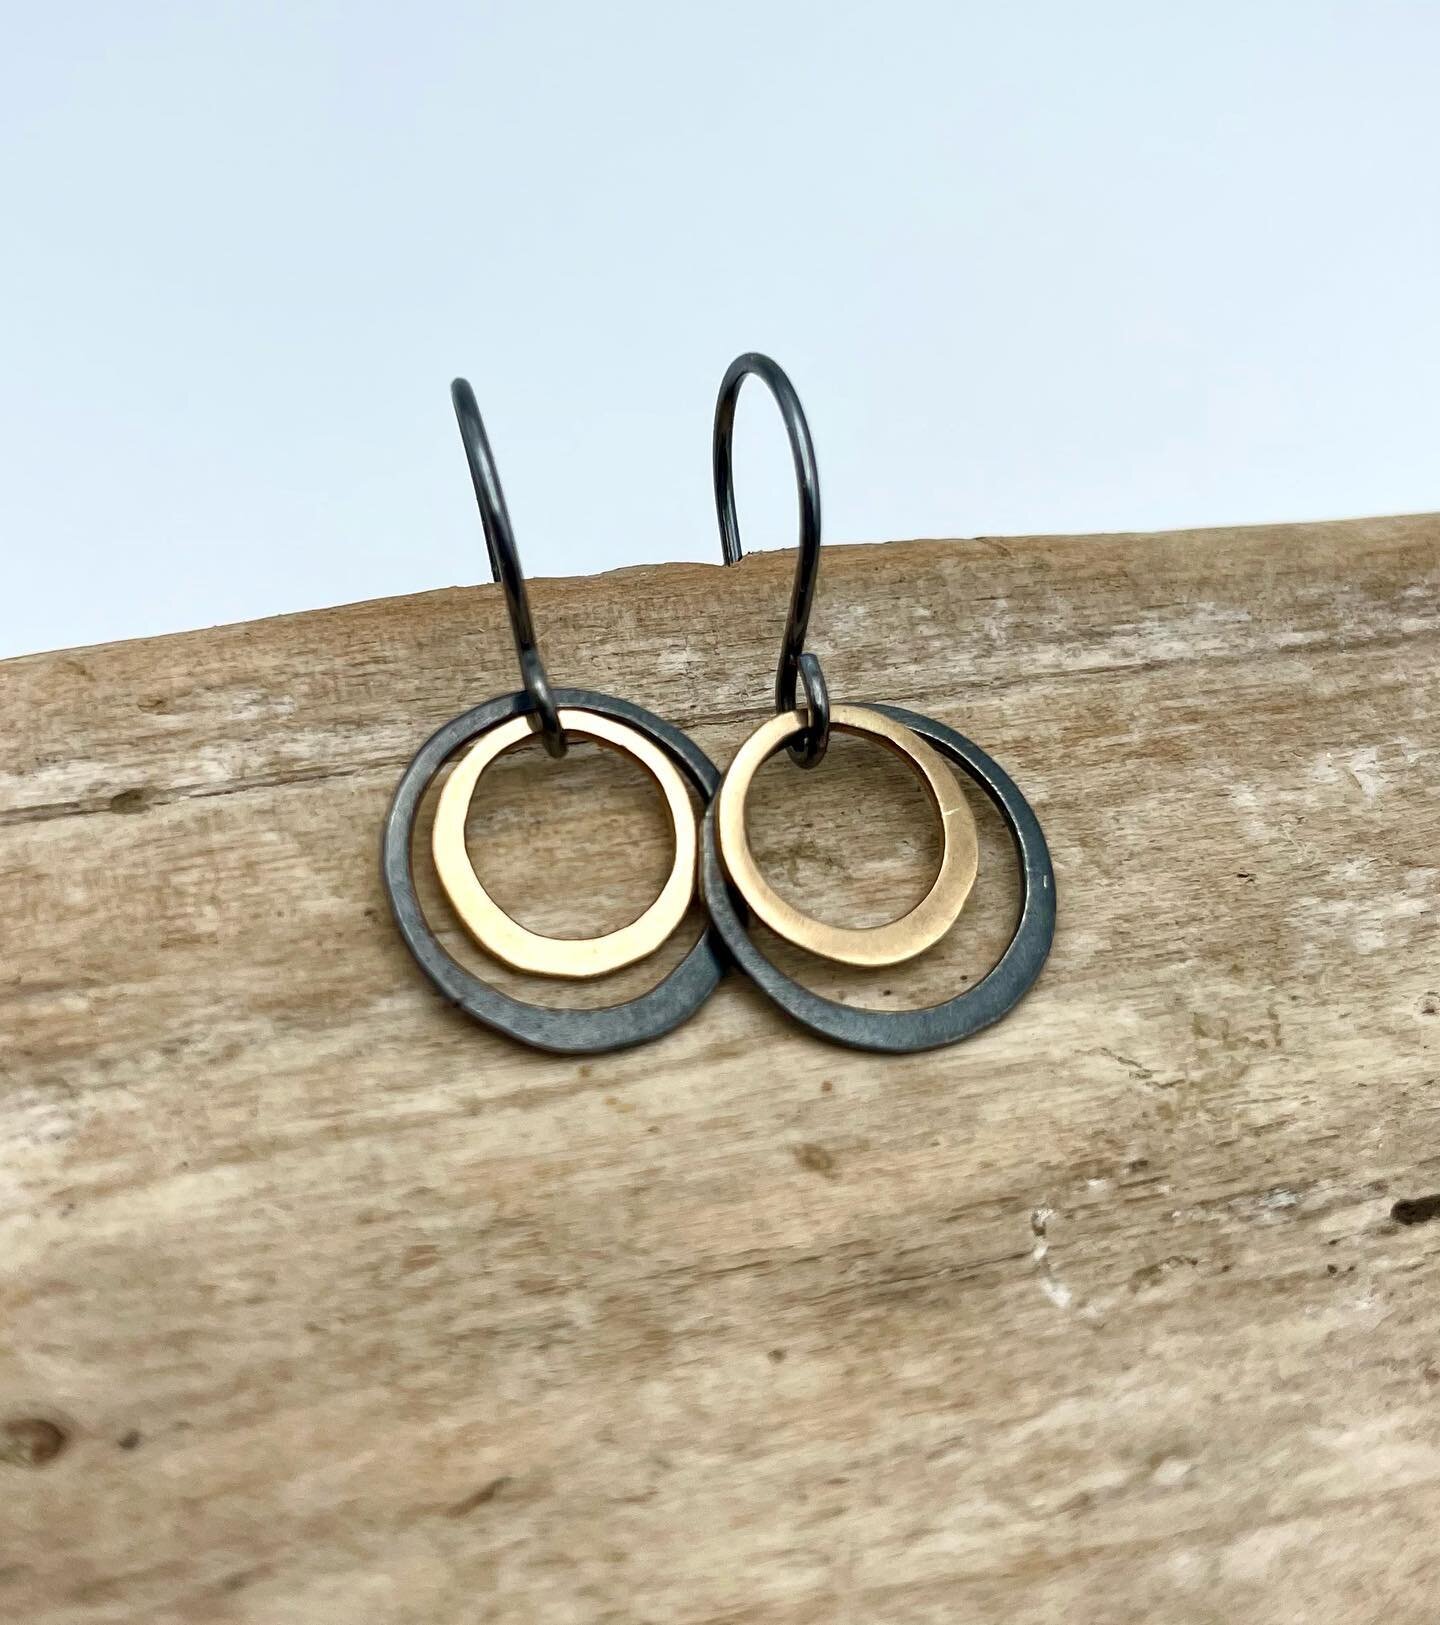 These petit mixed metal hoop earrings are now available for purchase. The inner hoop is 14k solid gold and the outer is oxidized sterling silver.  They are small and dangly and perfect for everyday wear!
#mixedmetalhoopearrings #mixedmetalearrings #s